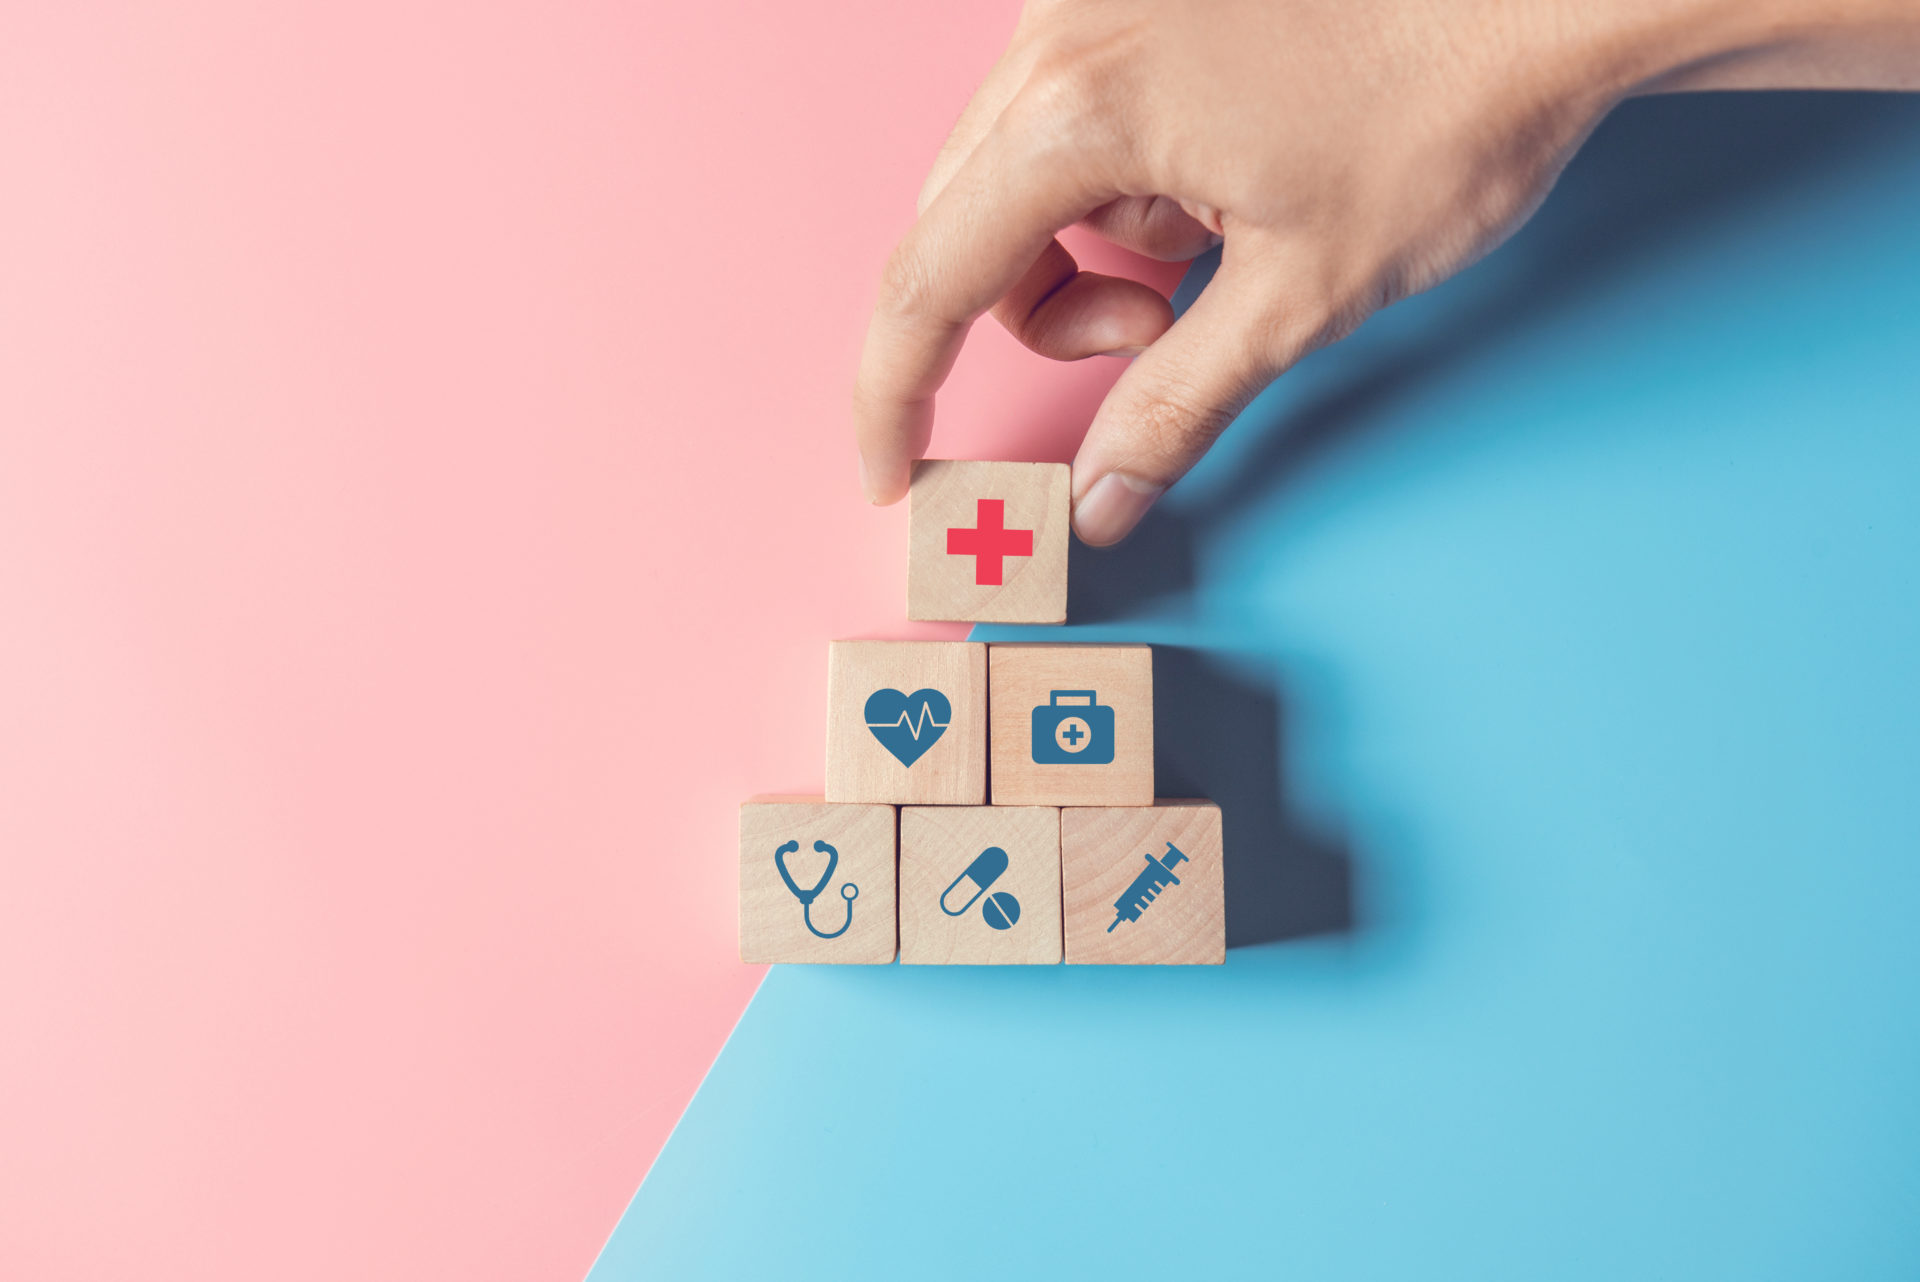 Health Insurance Concept, Hand of man arranging wood cube stacking with icon healthcare medical on pastel blue and pink background, copy space.